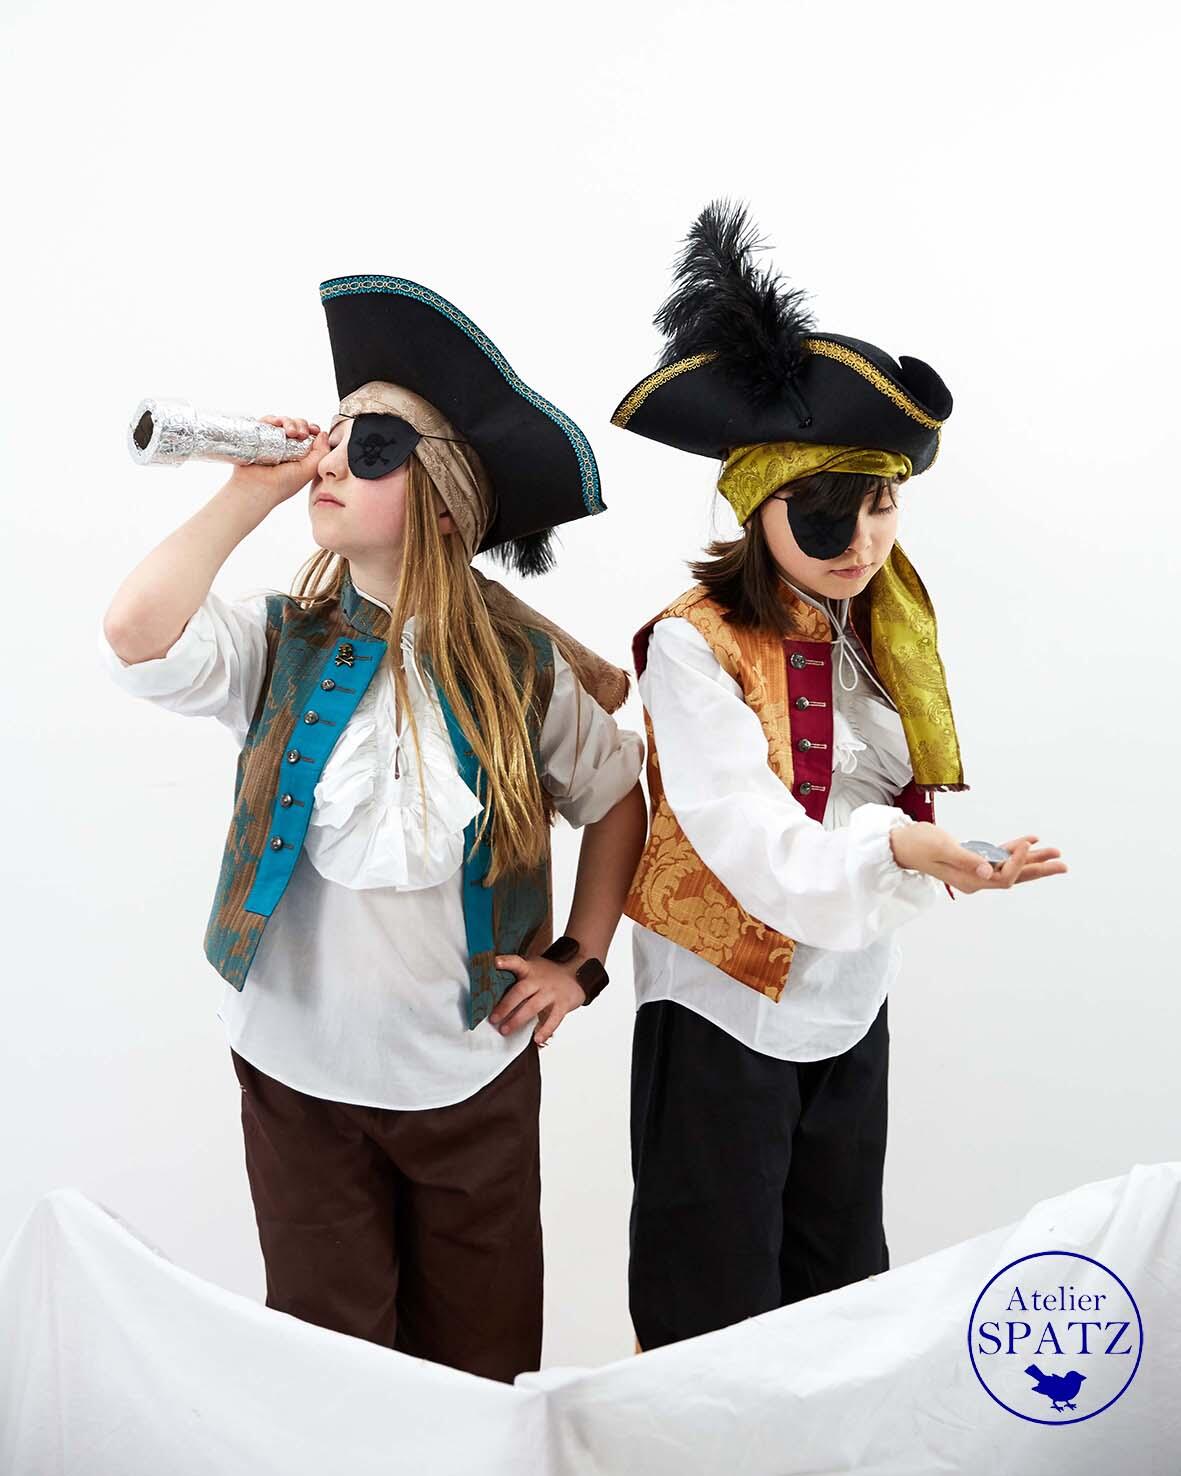 Pirate costume for little buccaneers in carnival and for birthdays